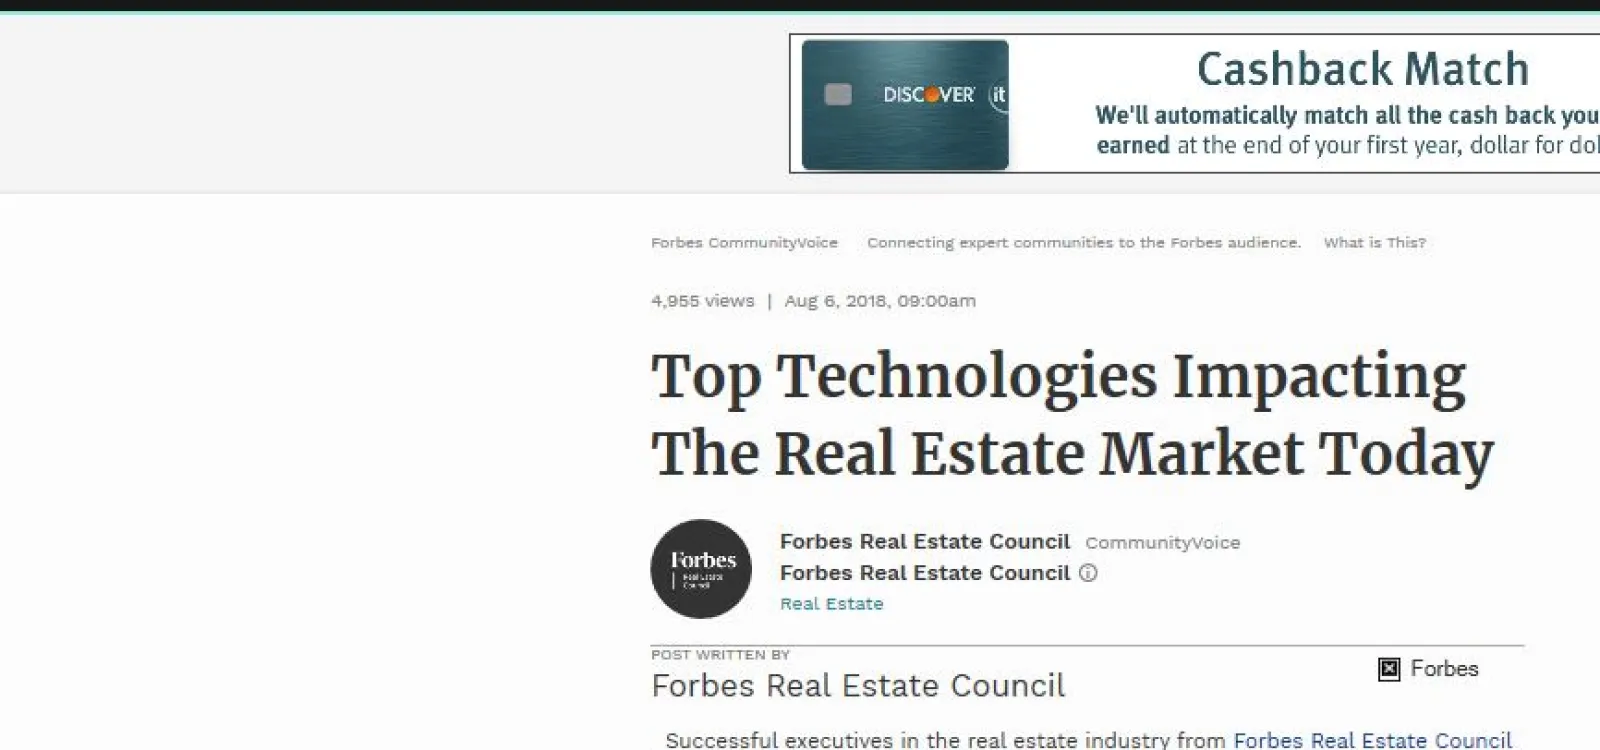 Top Technologies Impacting The Real Estate Market Today